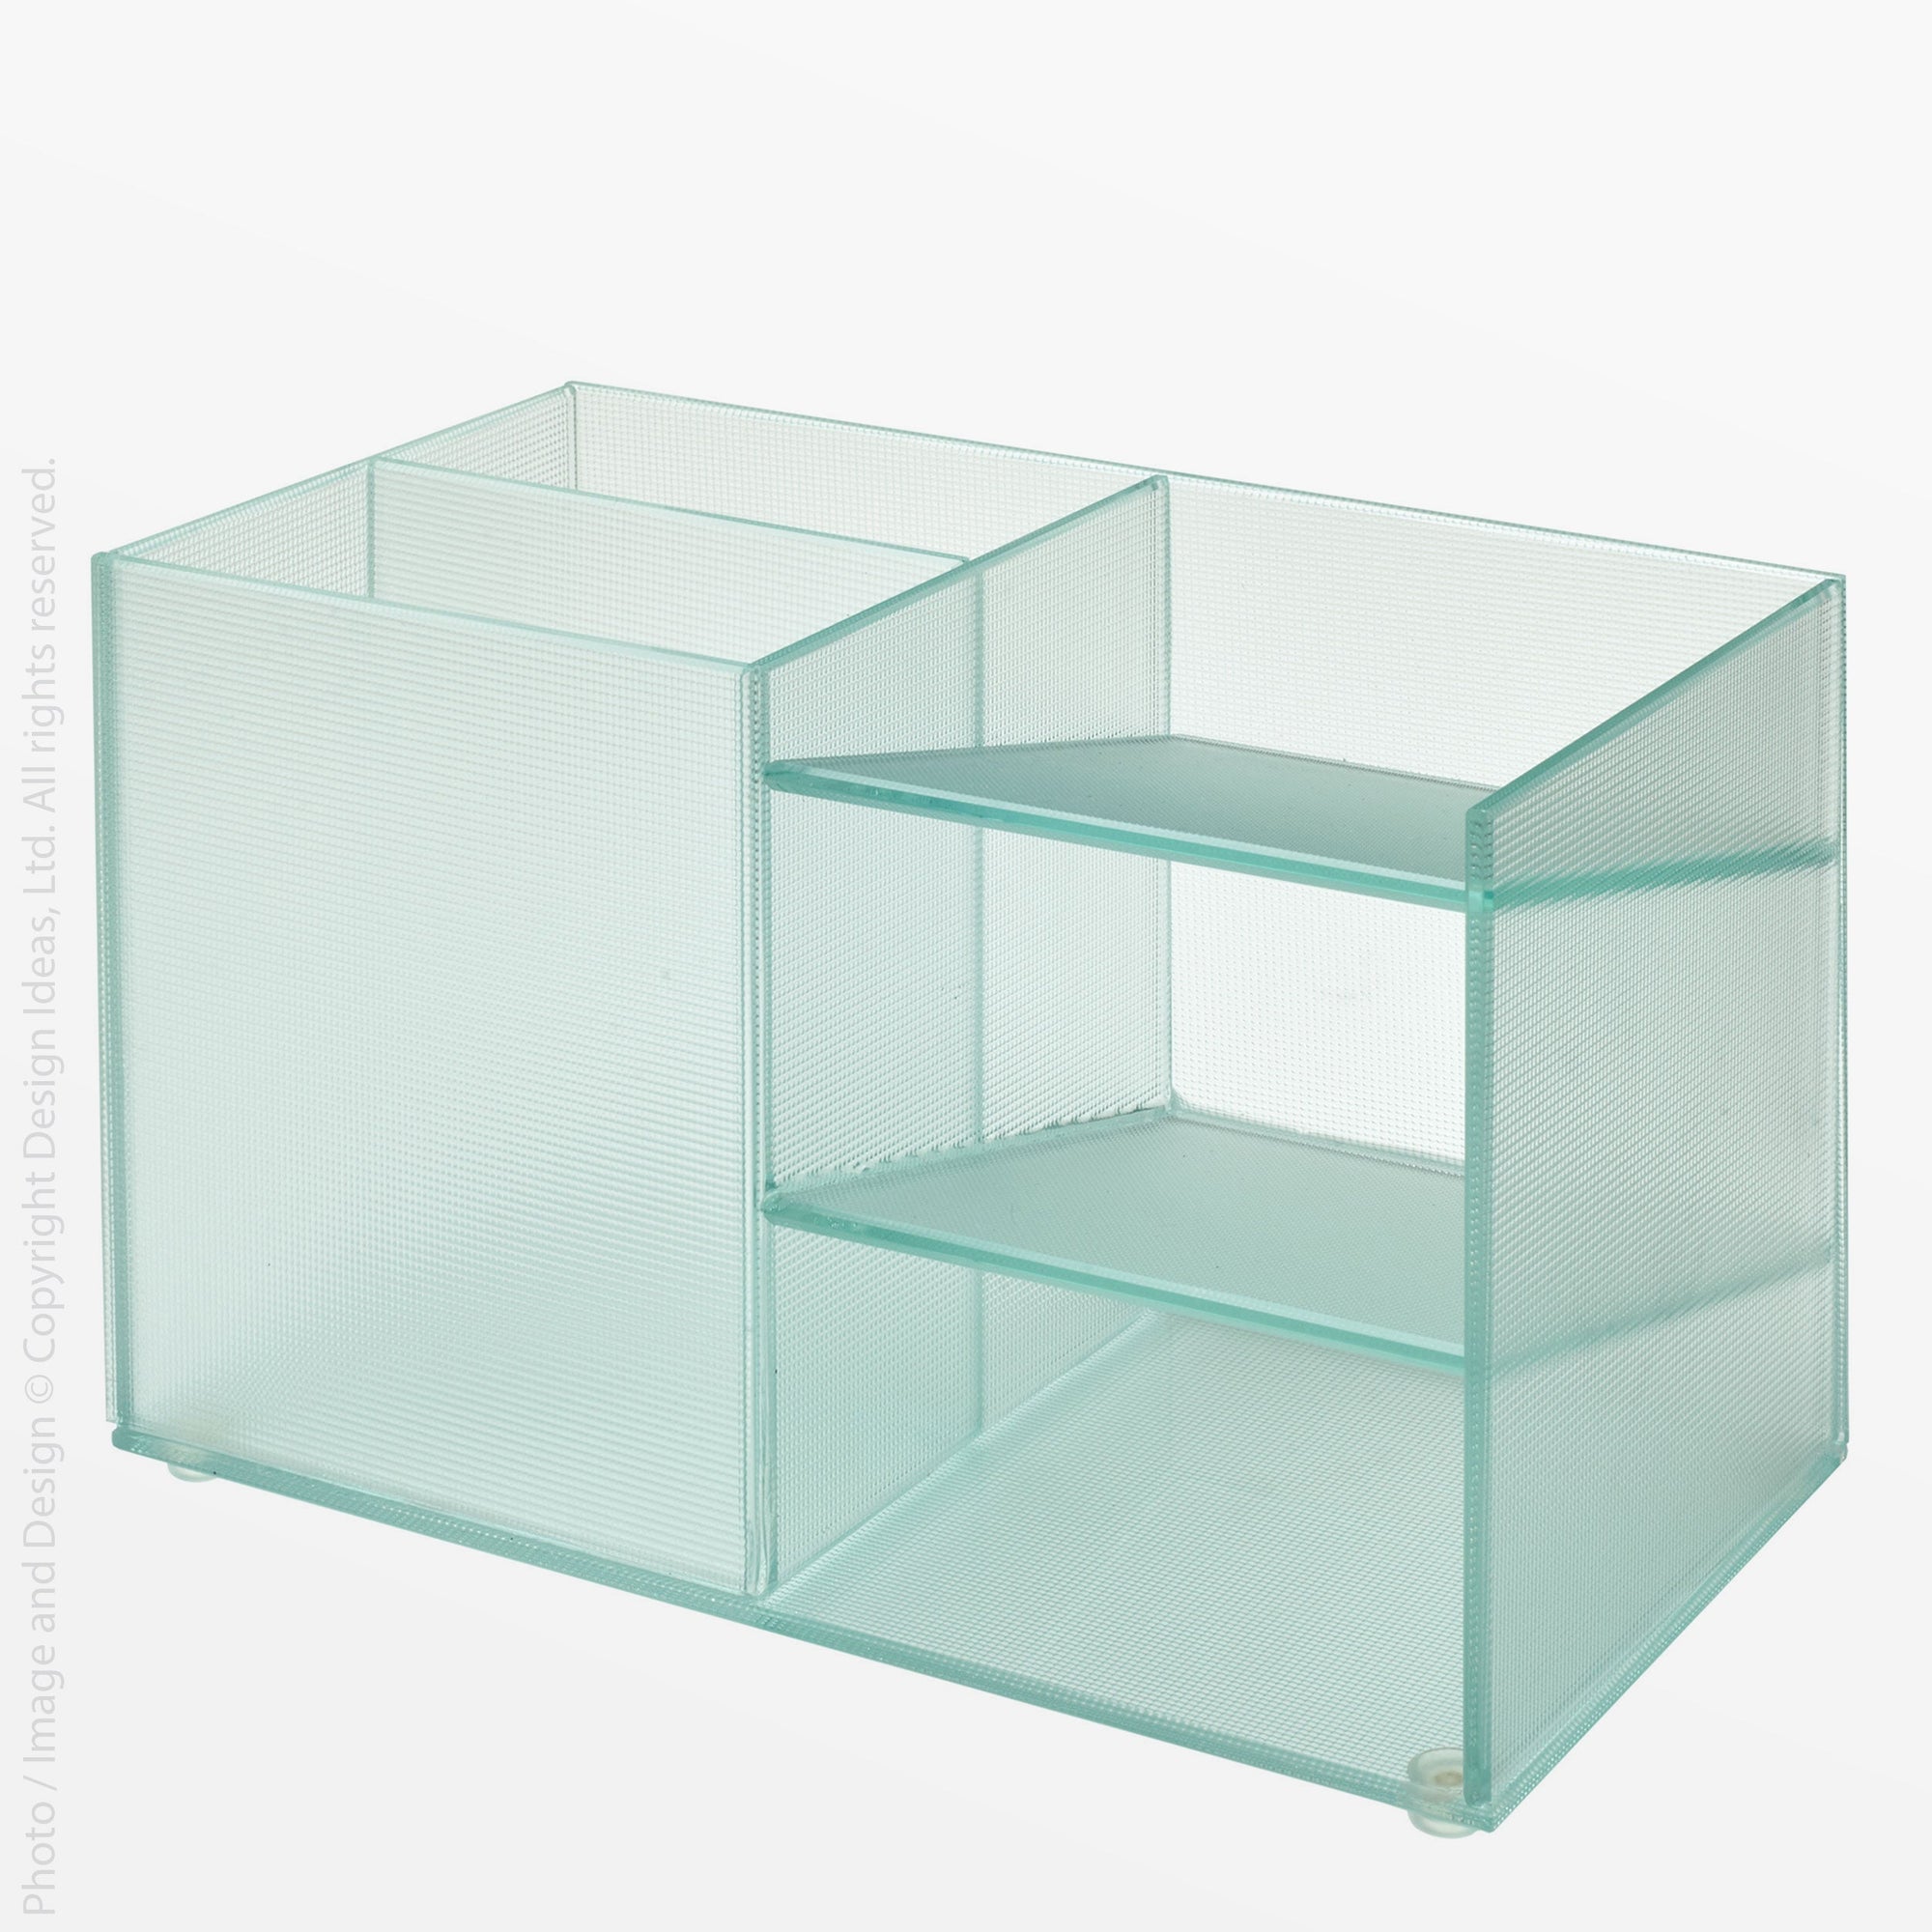 Vinestra Glass Desk Organizer - Clear Color | Image 1 | From the Vinestra Collection | Skillfully handmade with natural glass for long lasting use | Available in clear color | texxture home